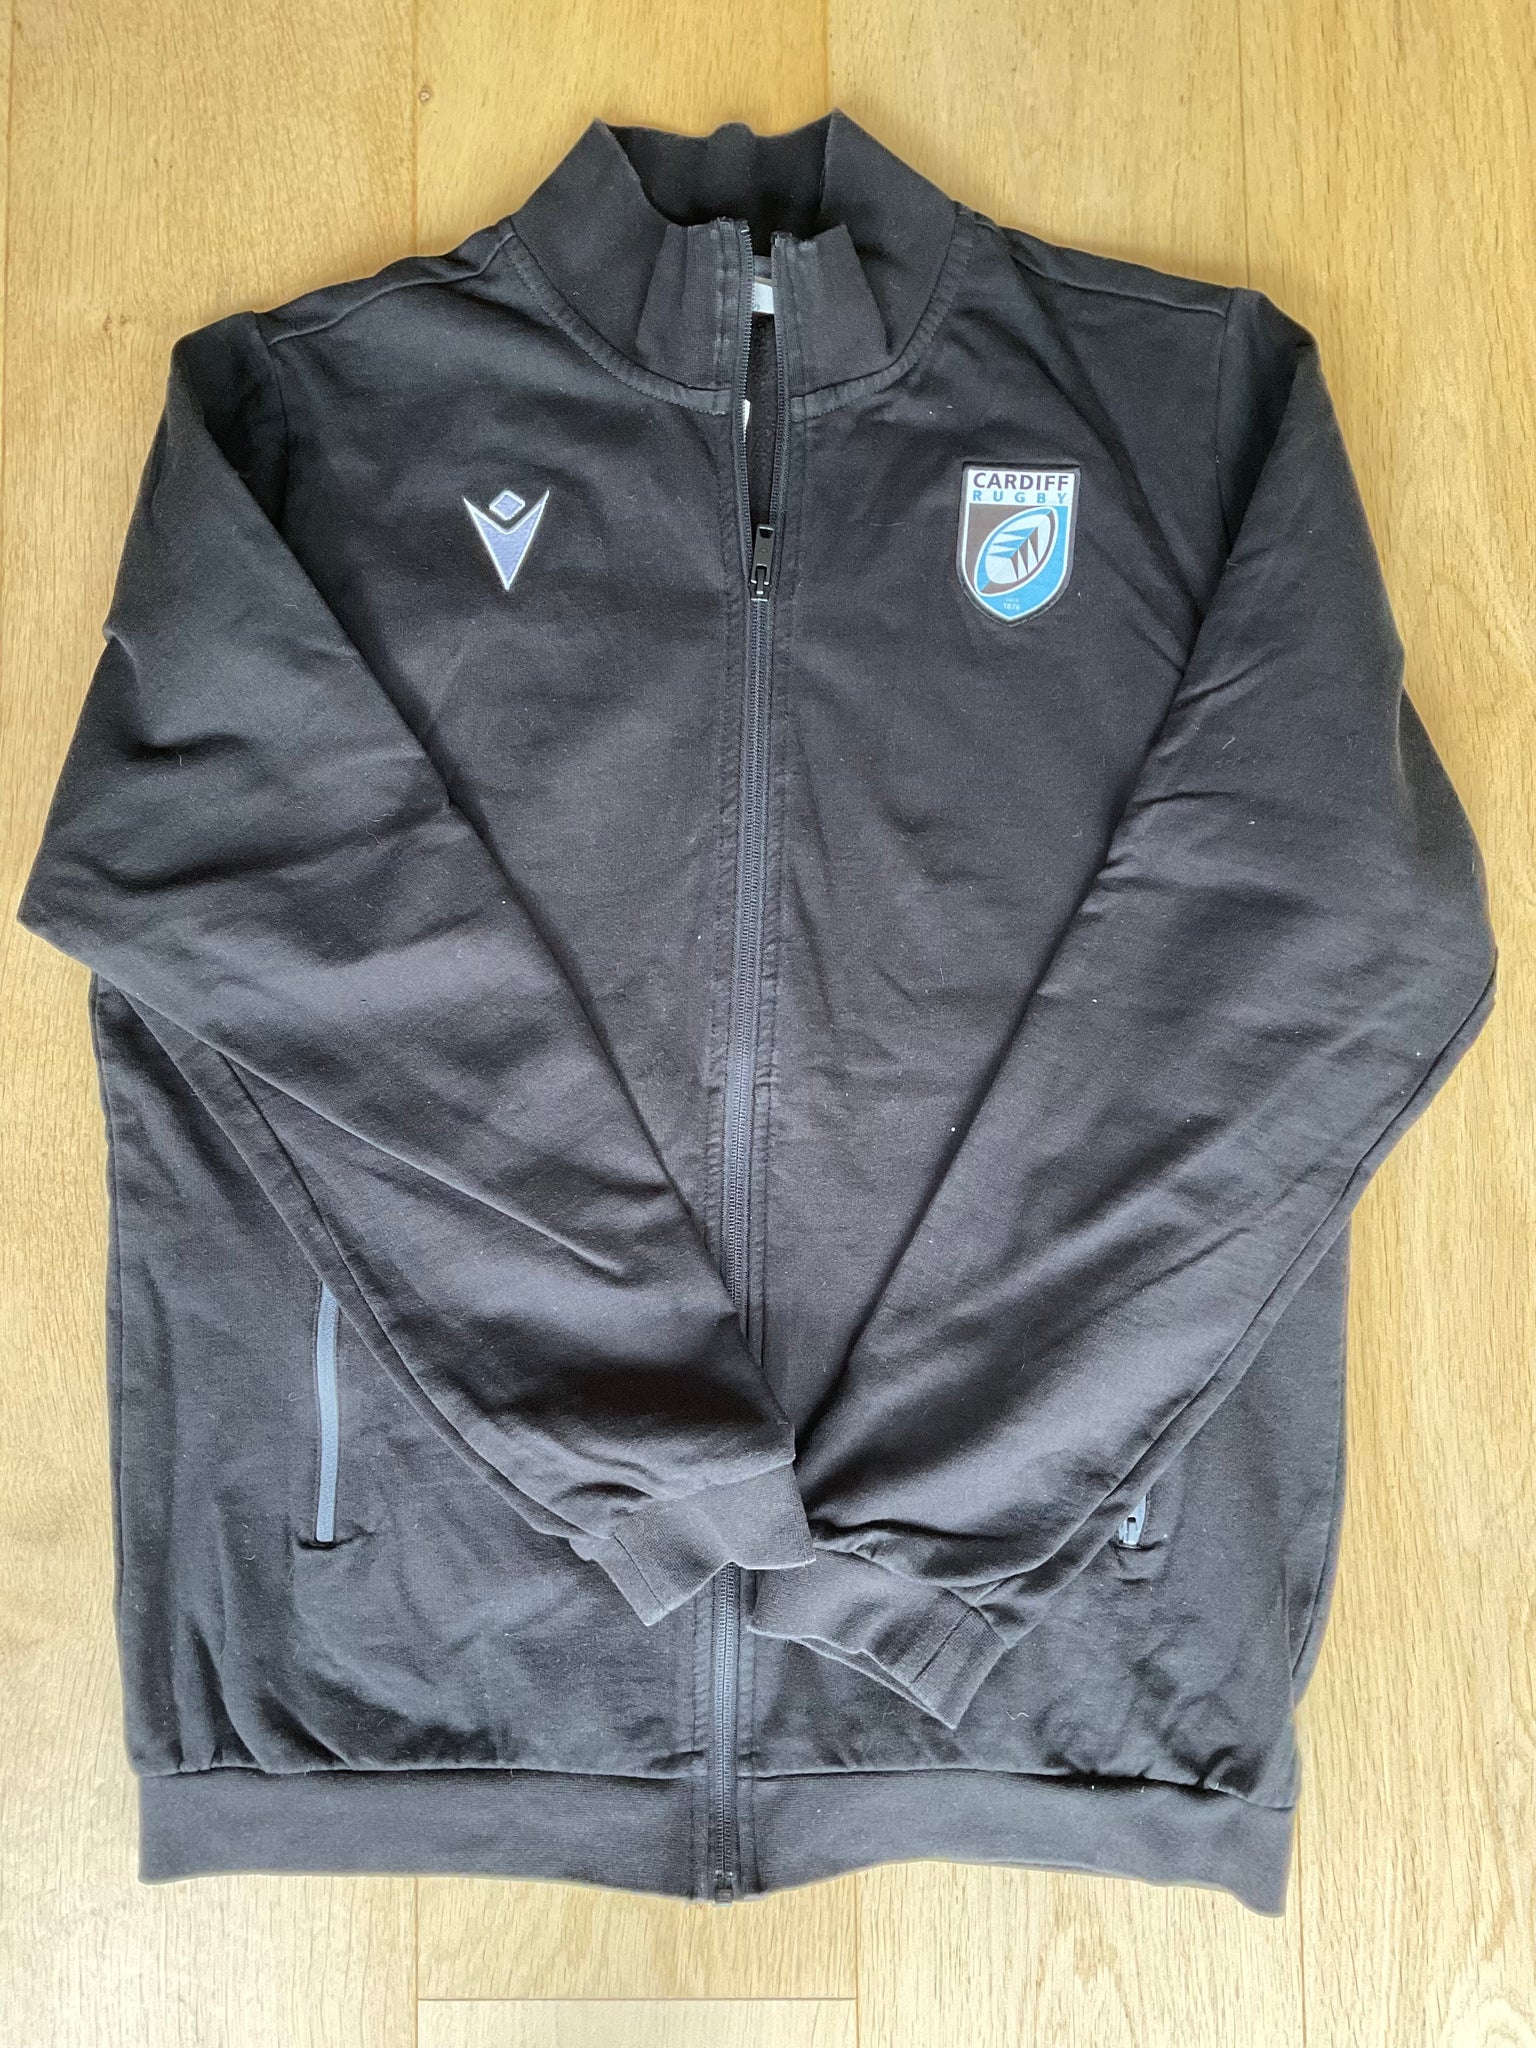 Thomas Young - Cardiff Rugby Full Zip Fleece Lined Jacket [Black]